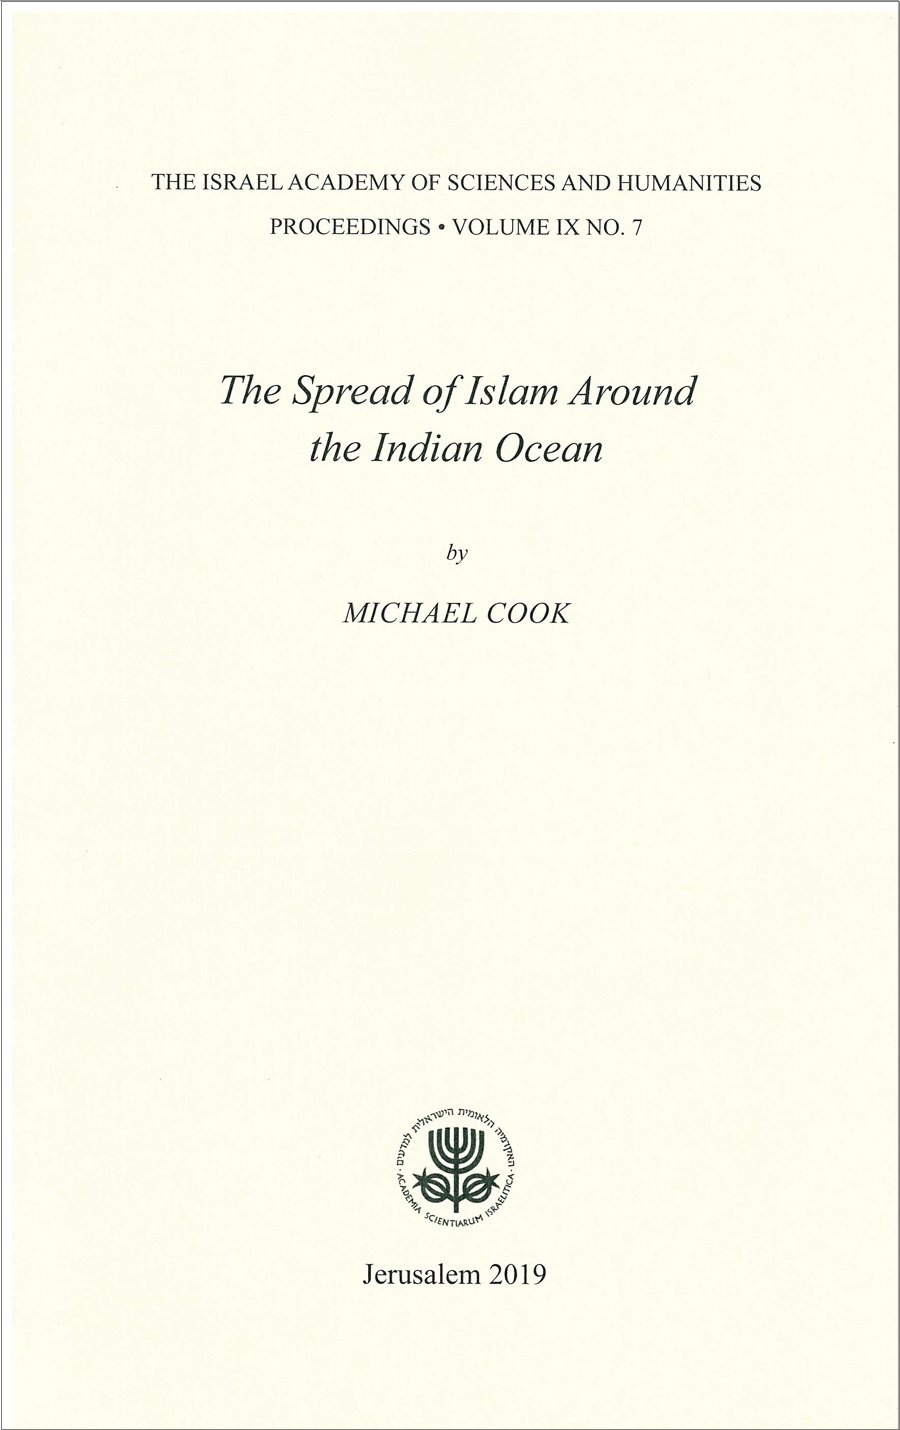 The Spread of Islam Around the Indian Ocean